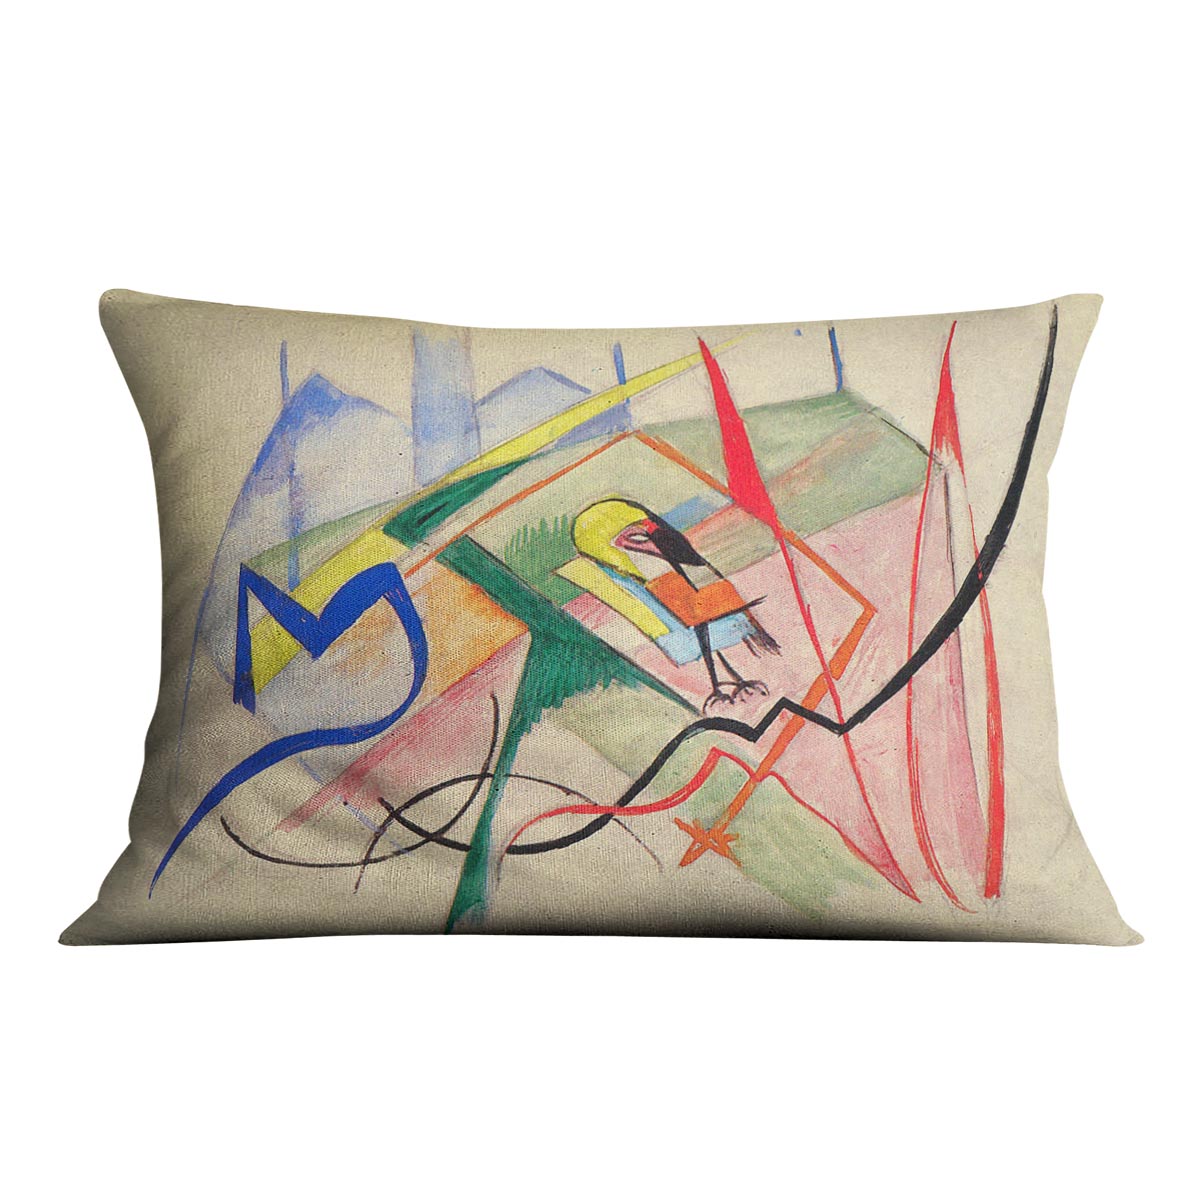 Small mythical creatures by Franz Marc Cushion